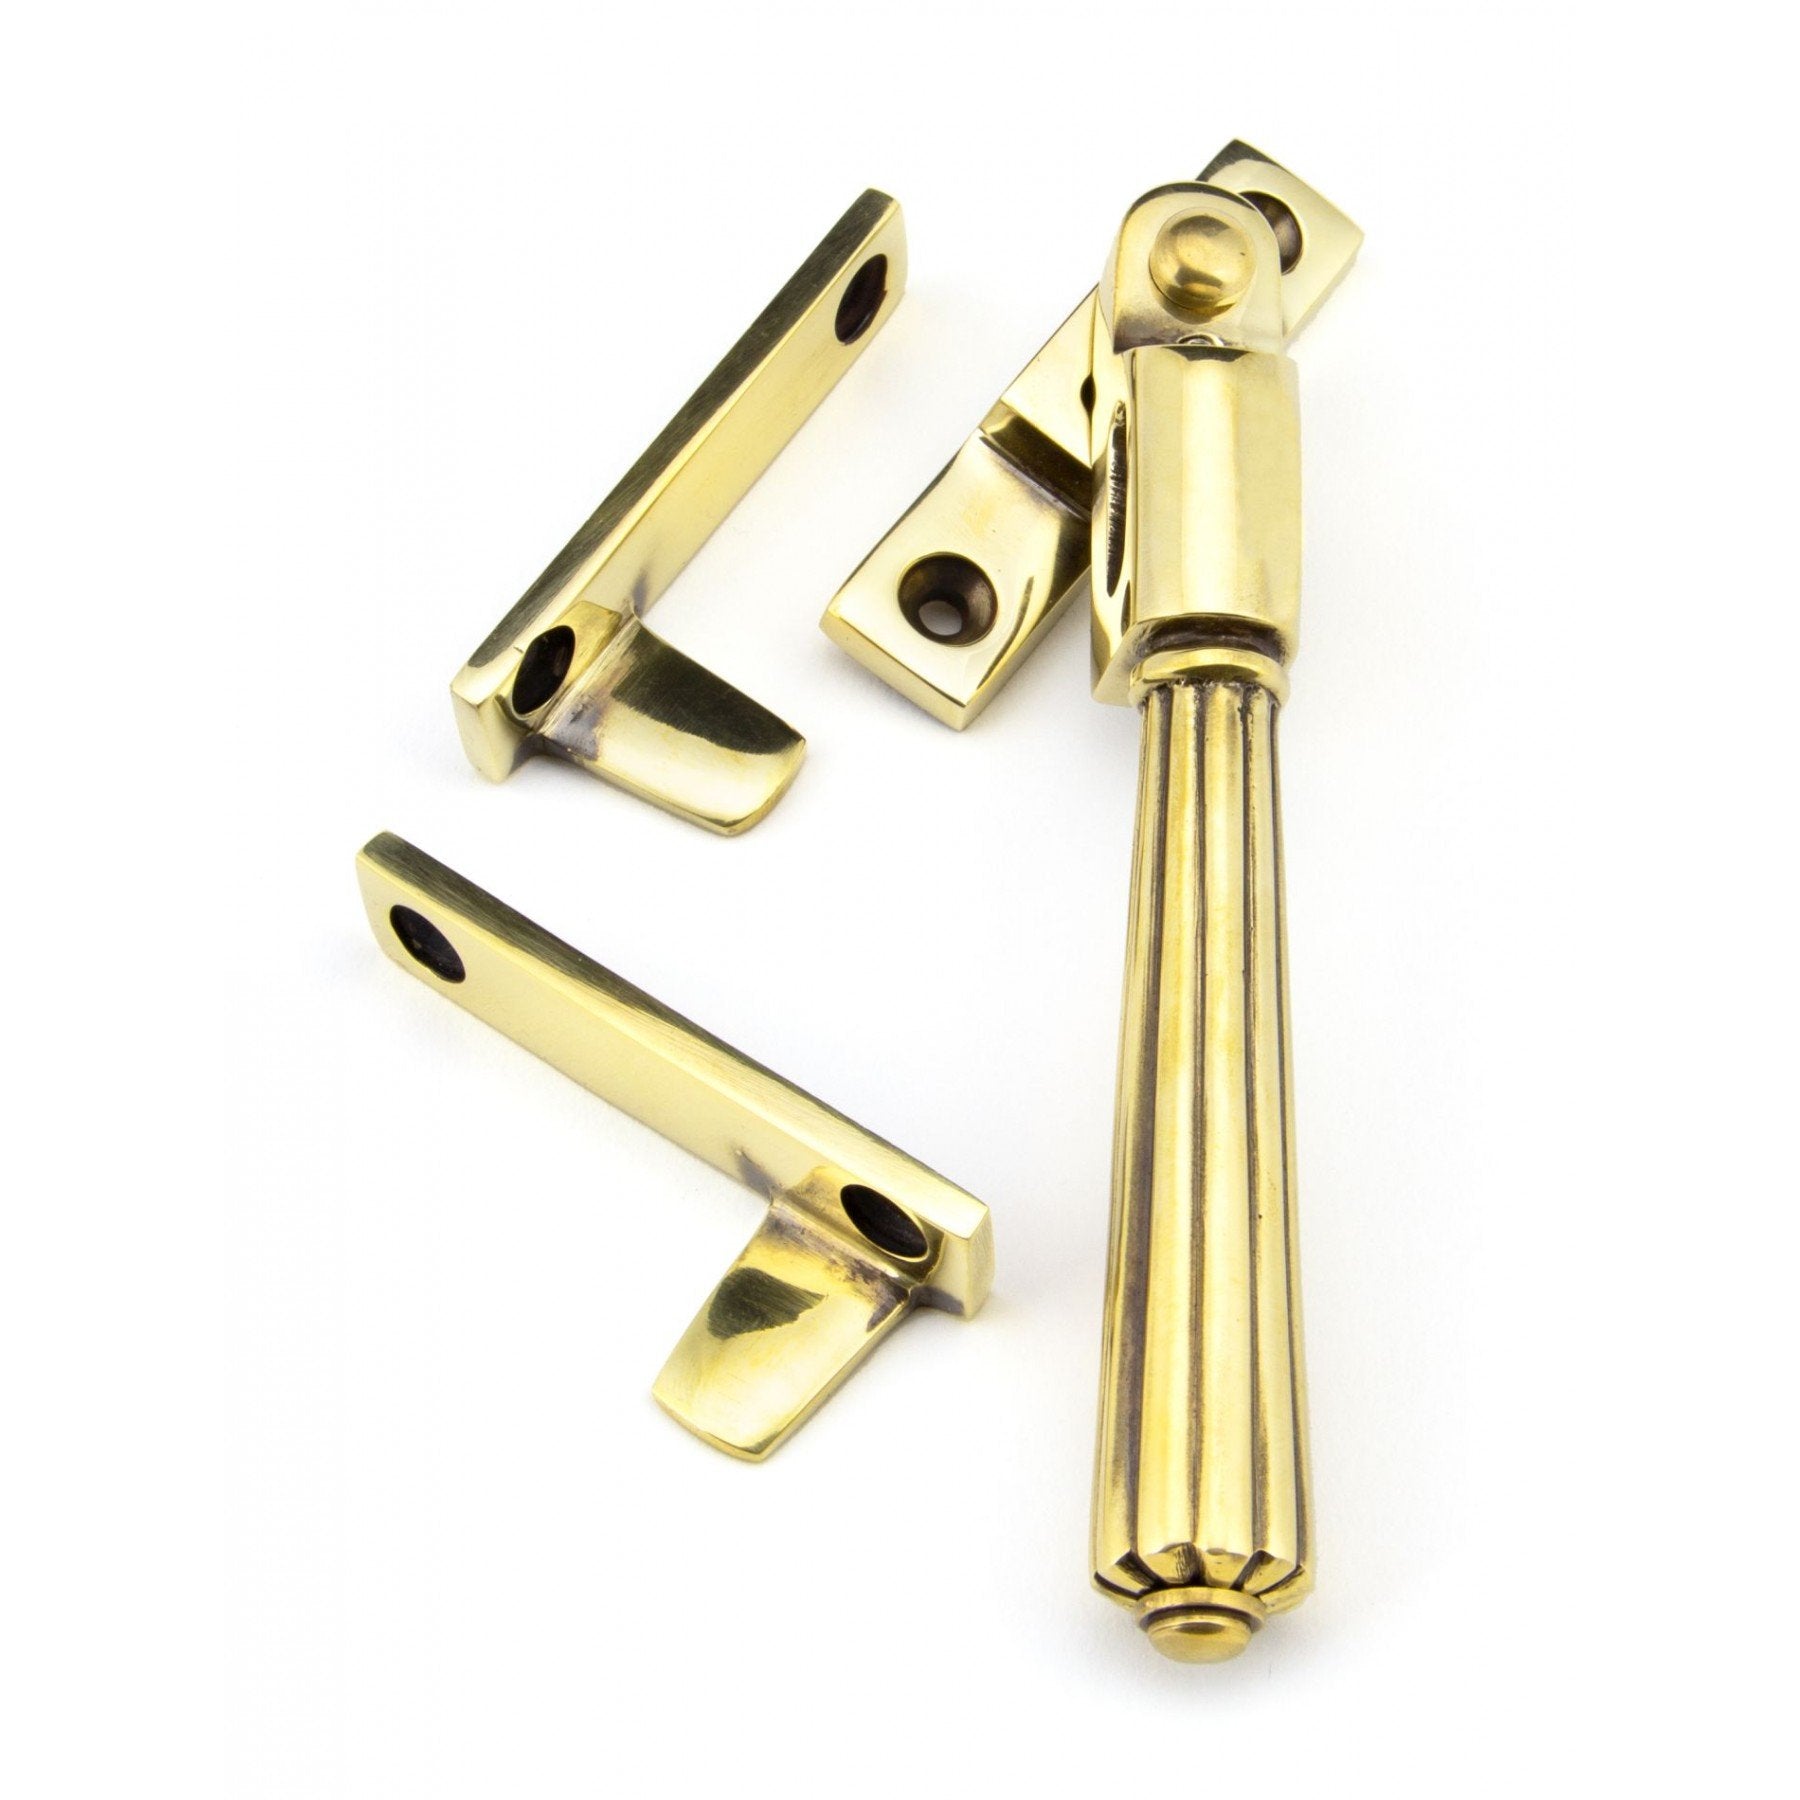 From the Anvil Aged Brass Night-Vent Locking Hinton Fastener - No.42 Interiors